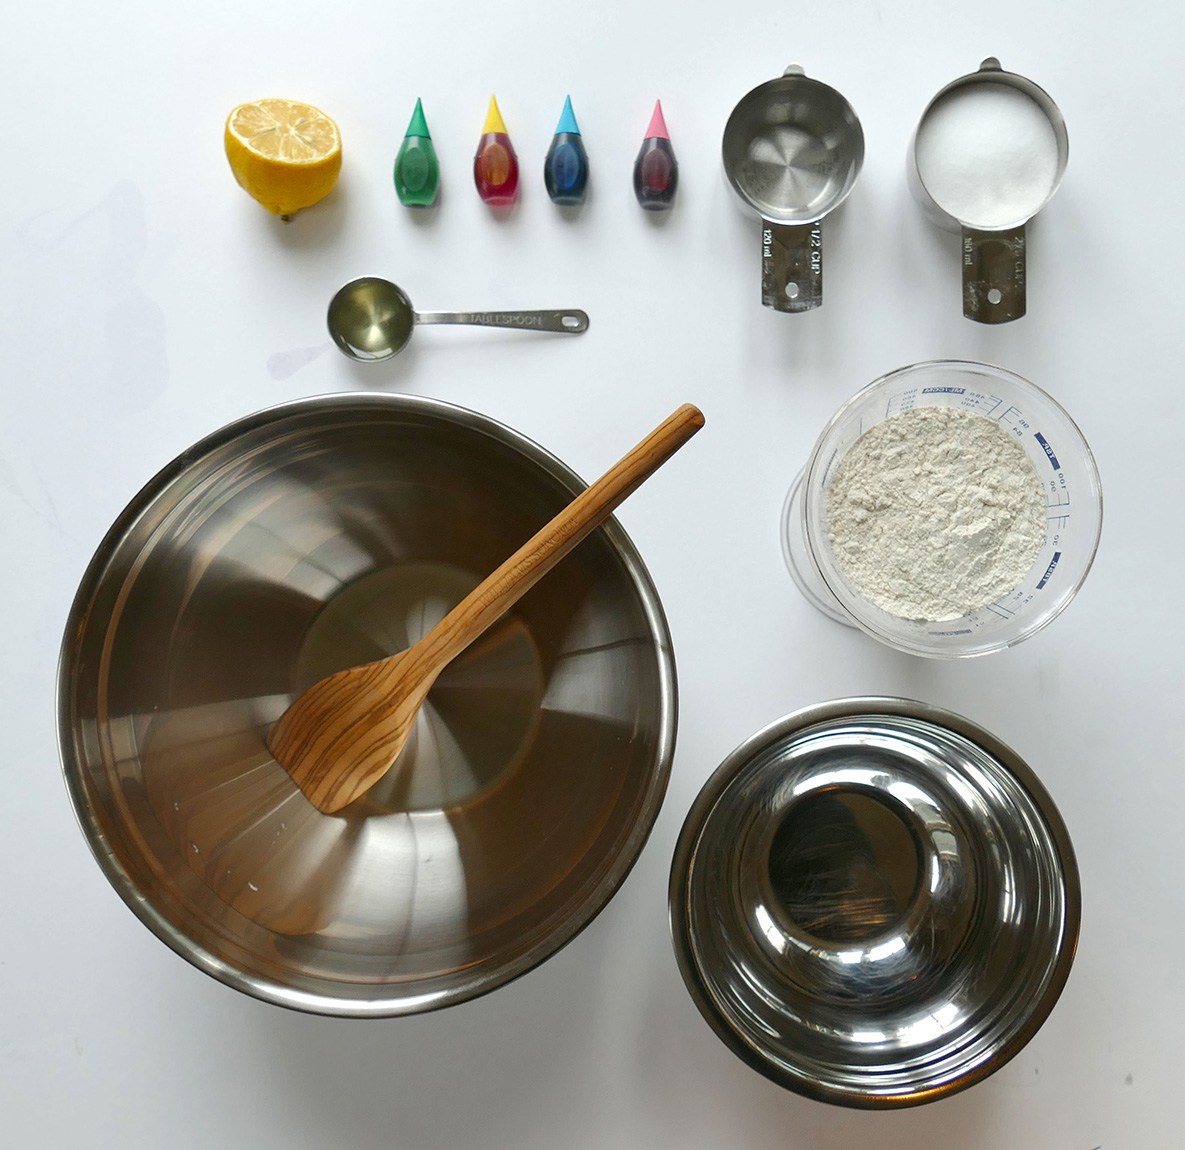 Clay making supplies—including two metal bowls, flour, salt, water, food coloring, and half a lemon—laid out on a table